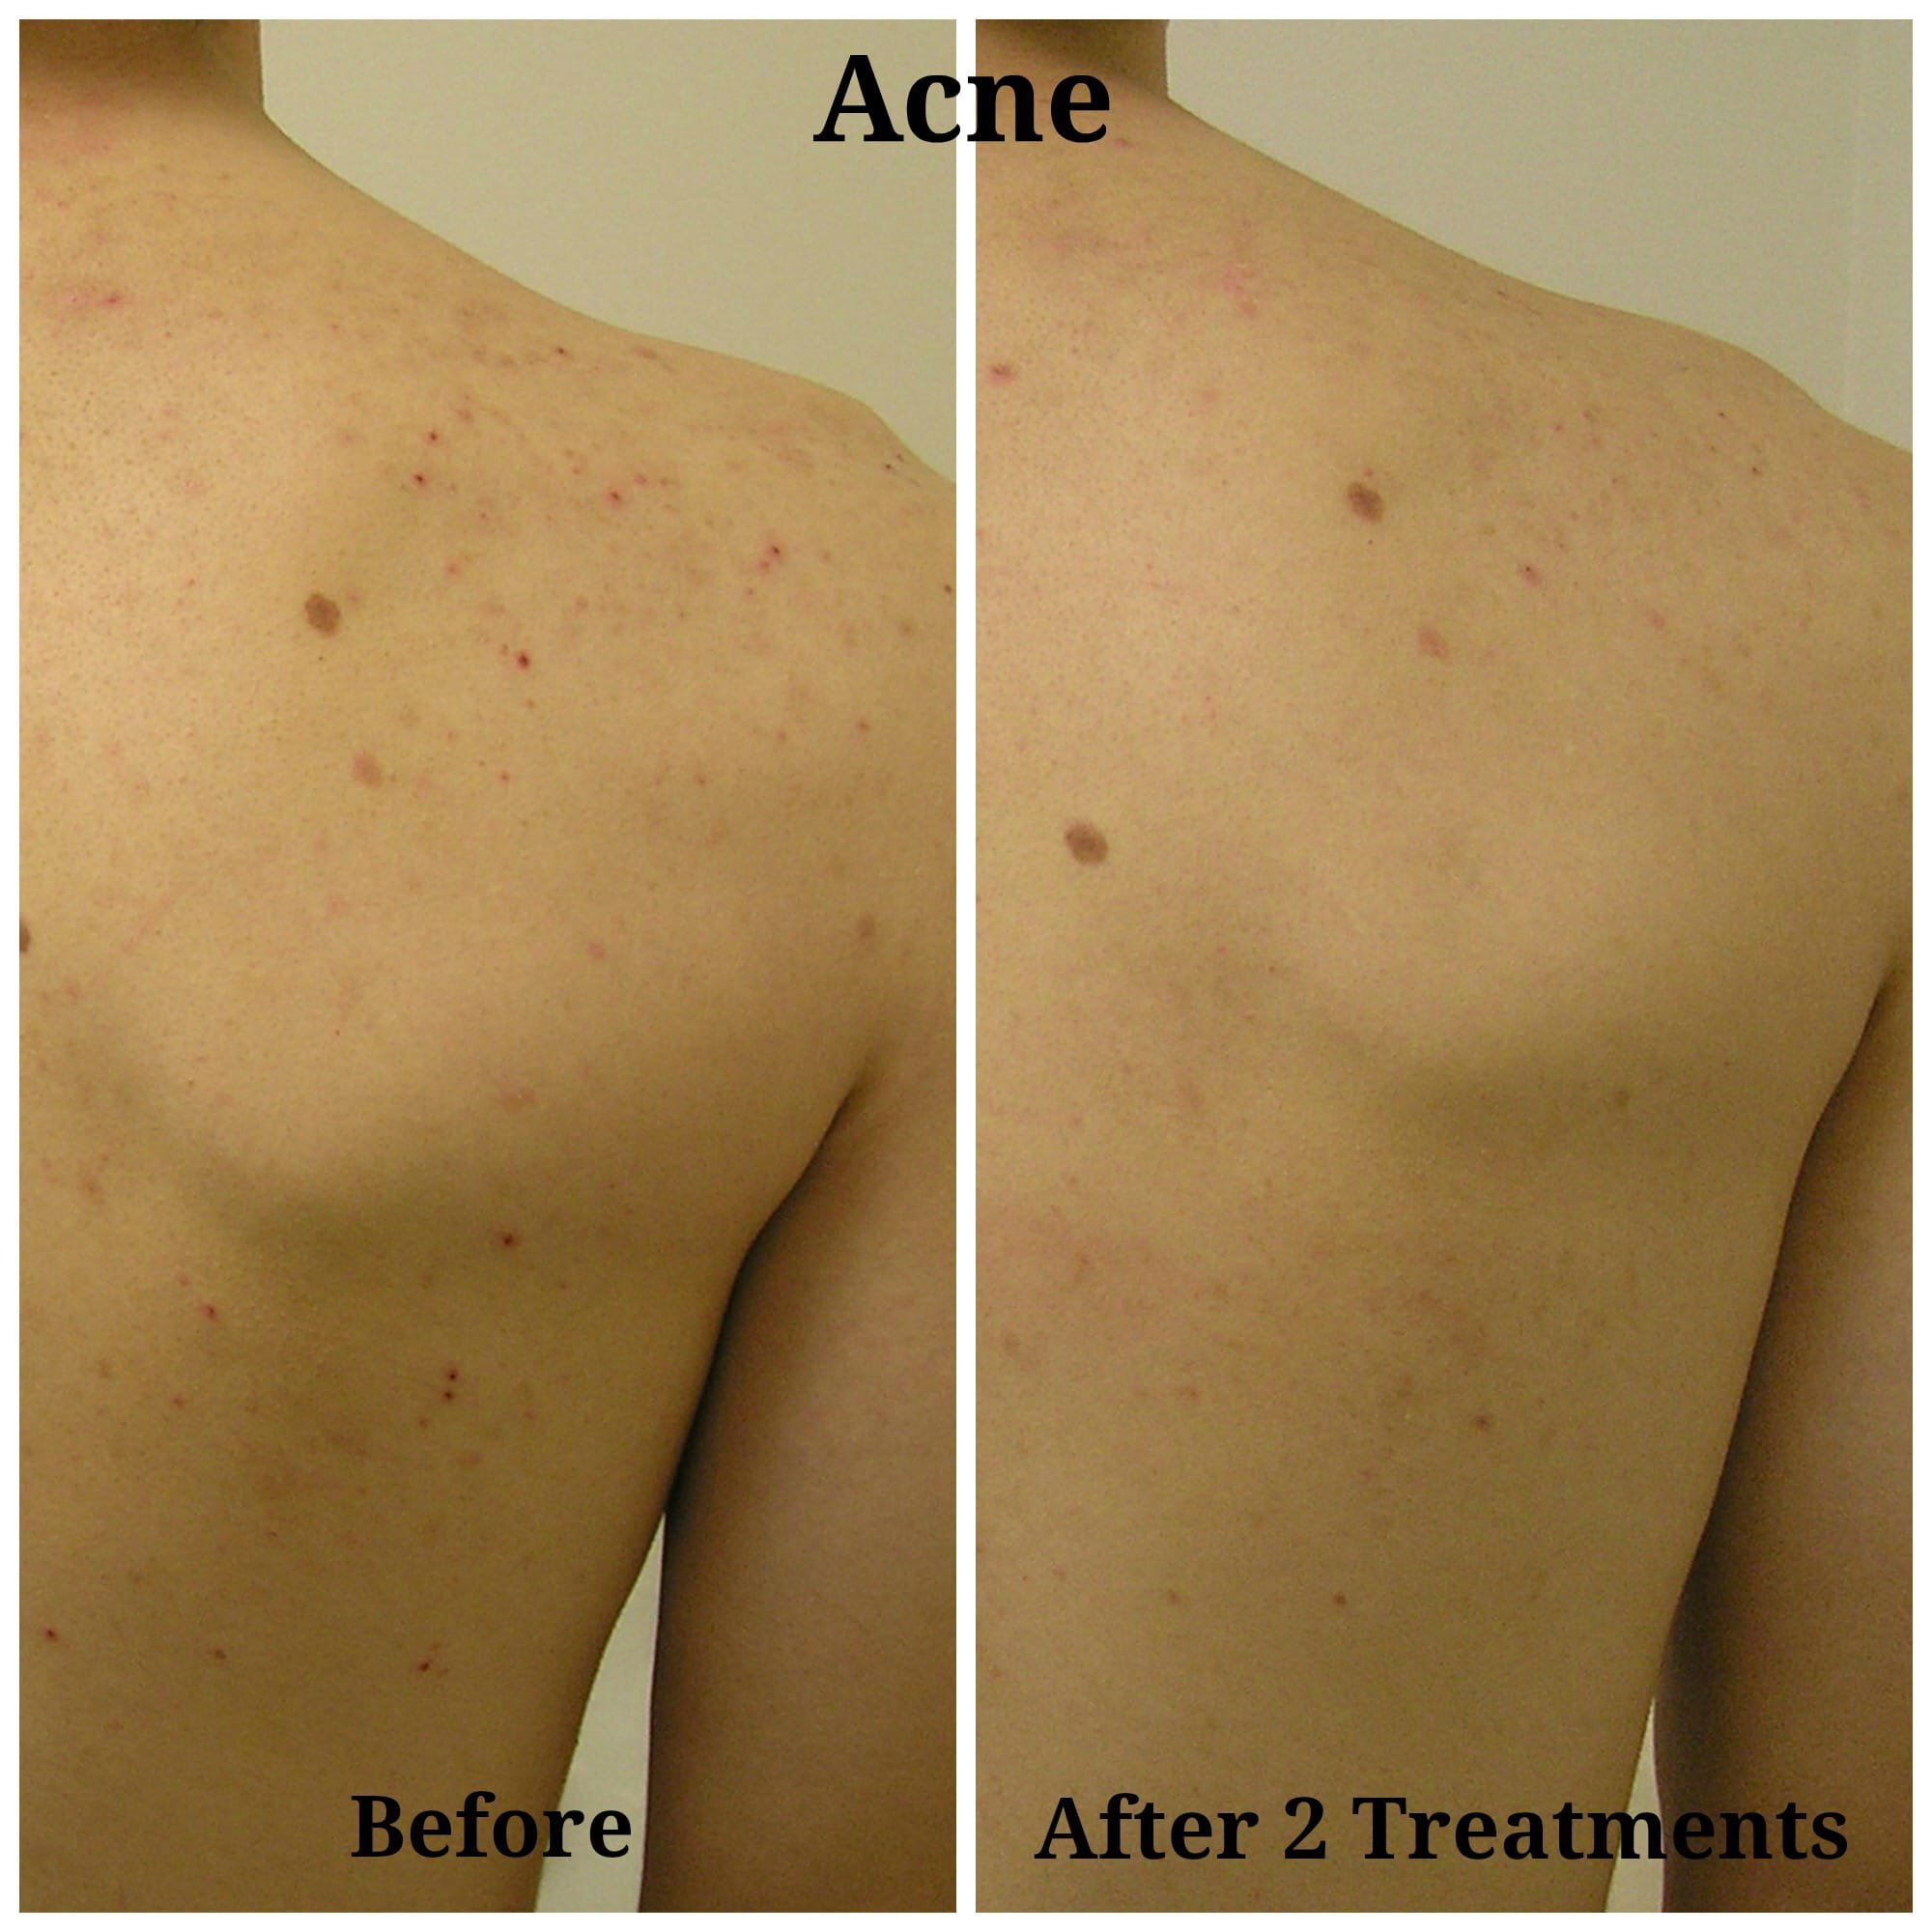 Acne-Before-After1